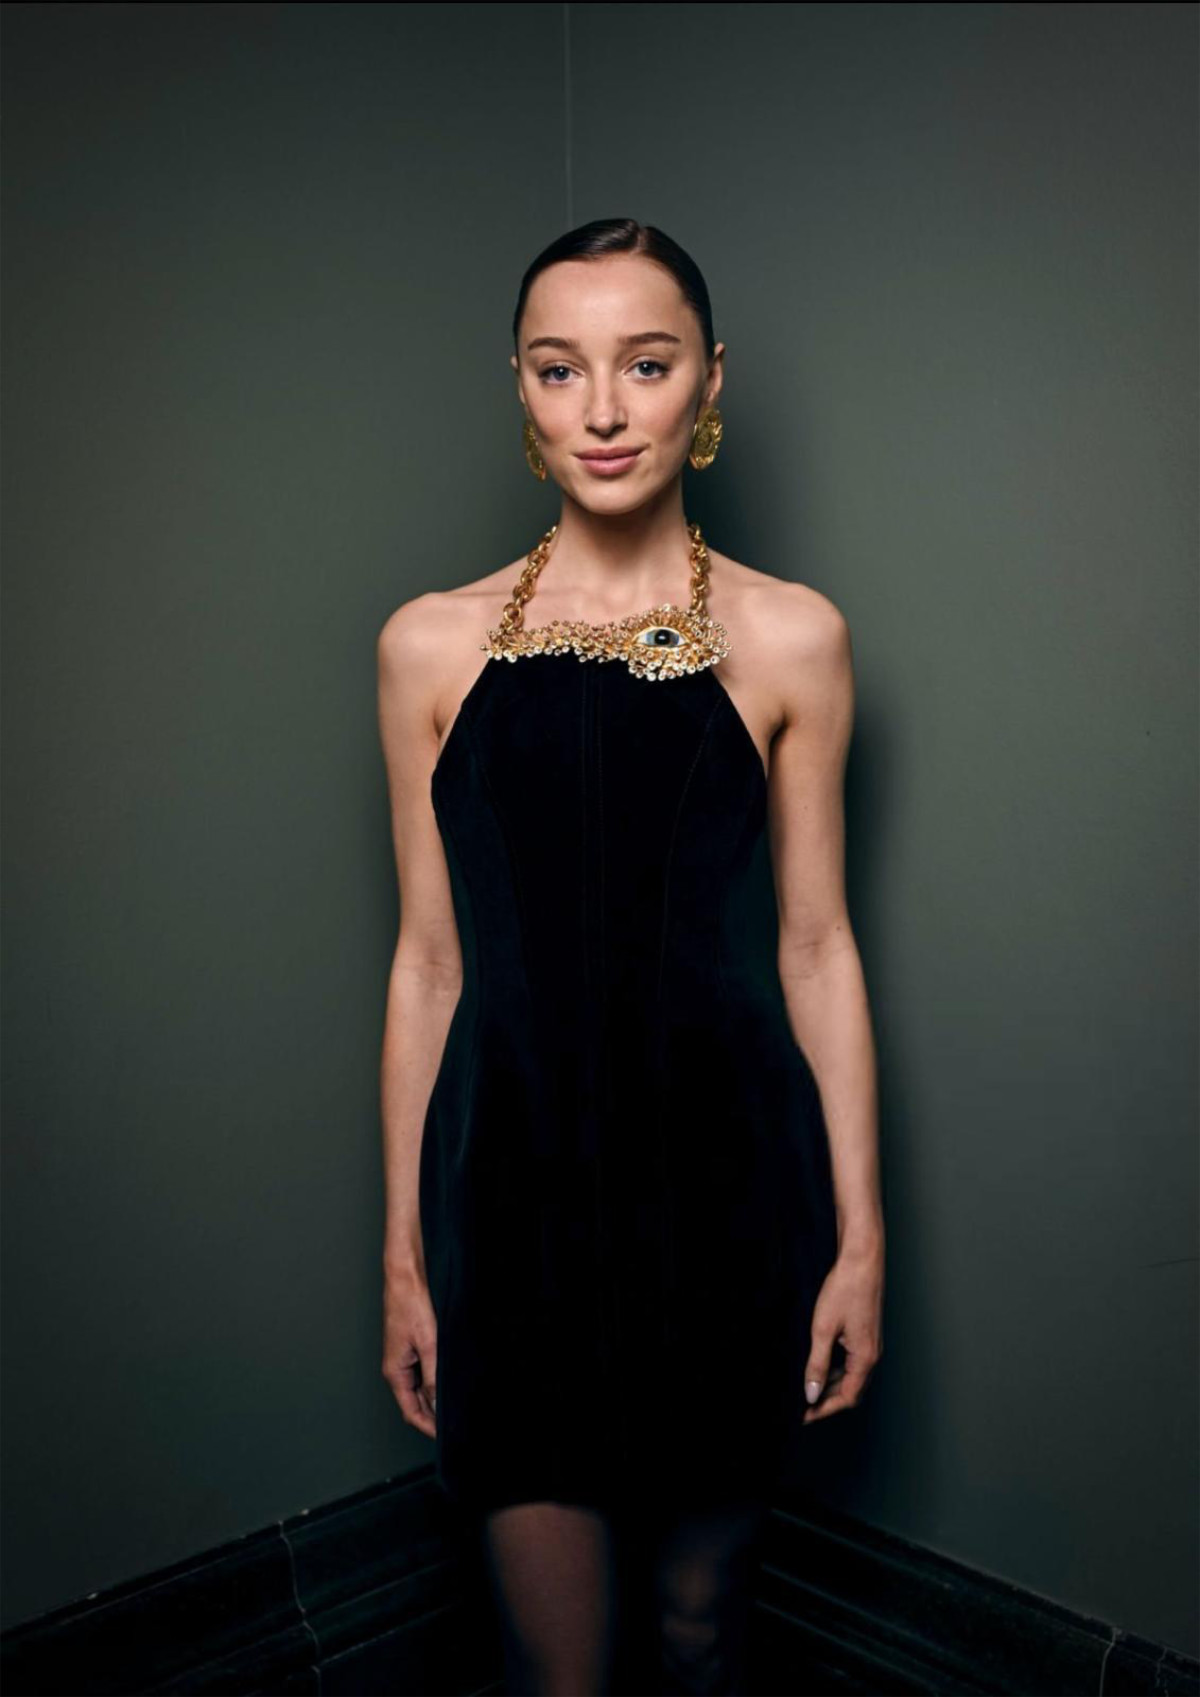 Phoebe Dynevor In Schiaparelli Ready-To-Wear At The 77th British Academy Awards